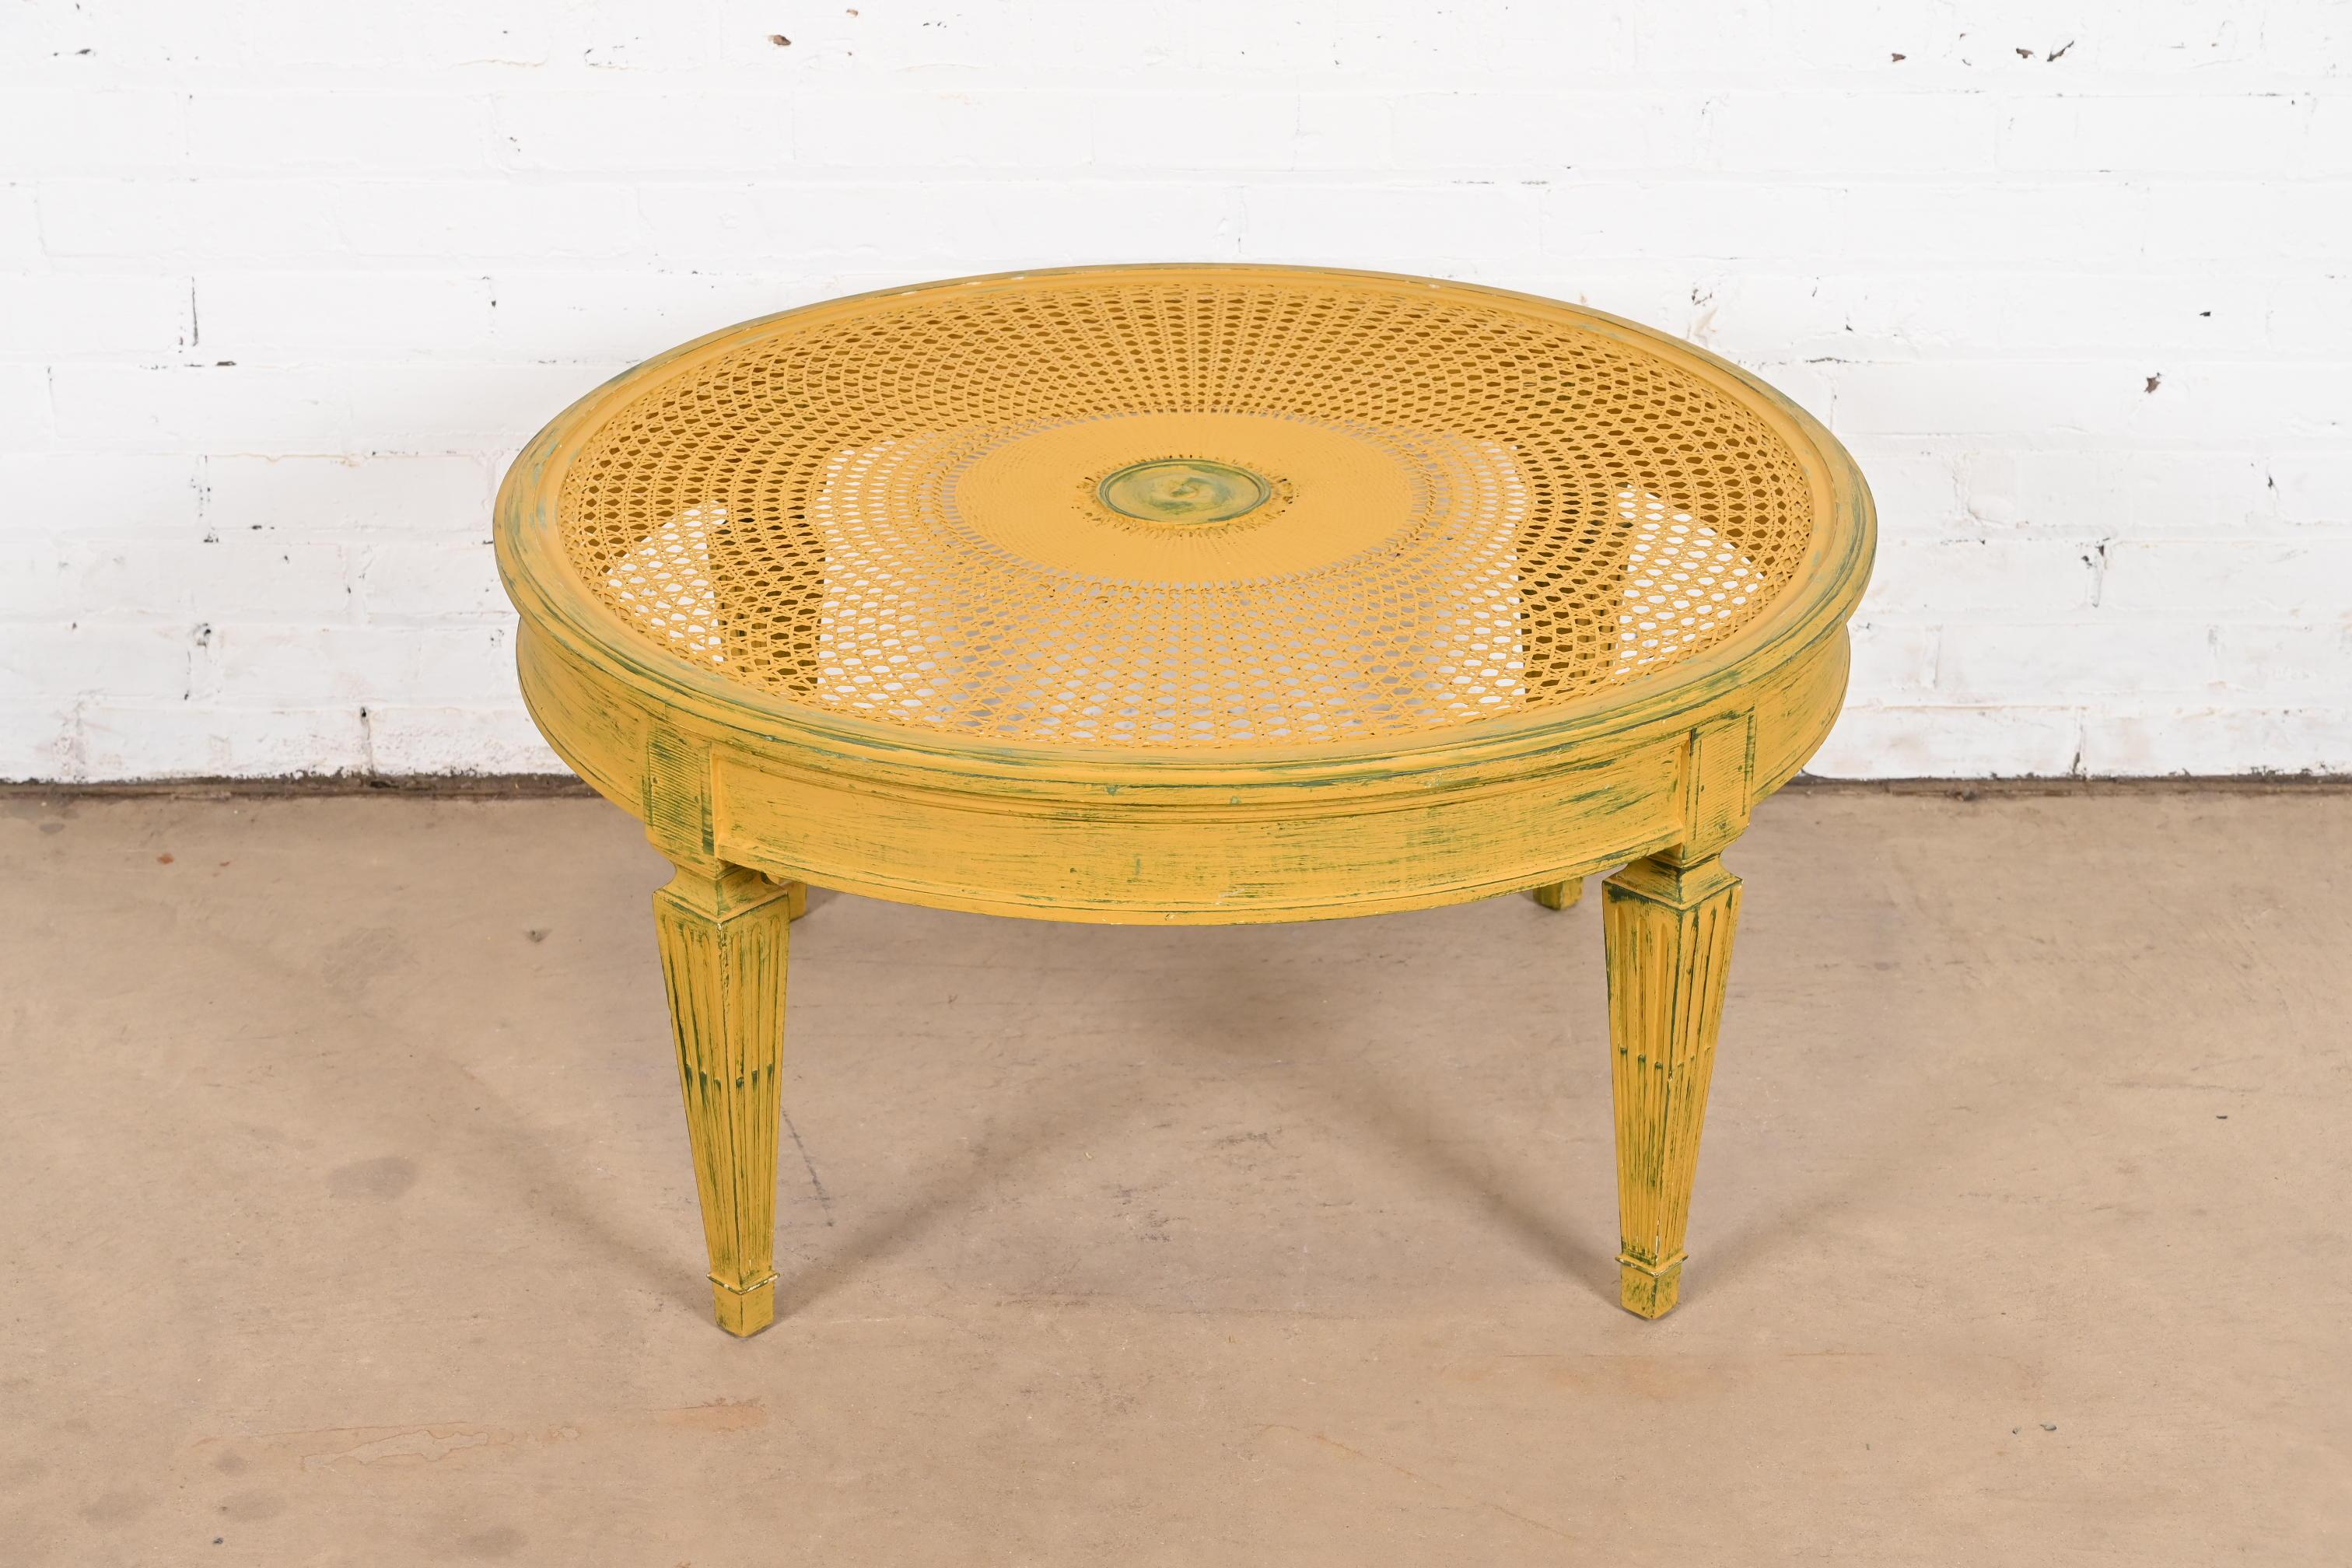 A gorgeous French Regency Louis XVI style coffee or cocktail table

In the manner of Baker Furniture

USA, Circa 1960s

Carved walnut, with a cane top, in a painted antiqued yellow color with green accents.

Measures: 33.5